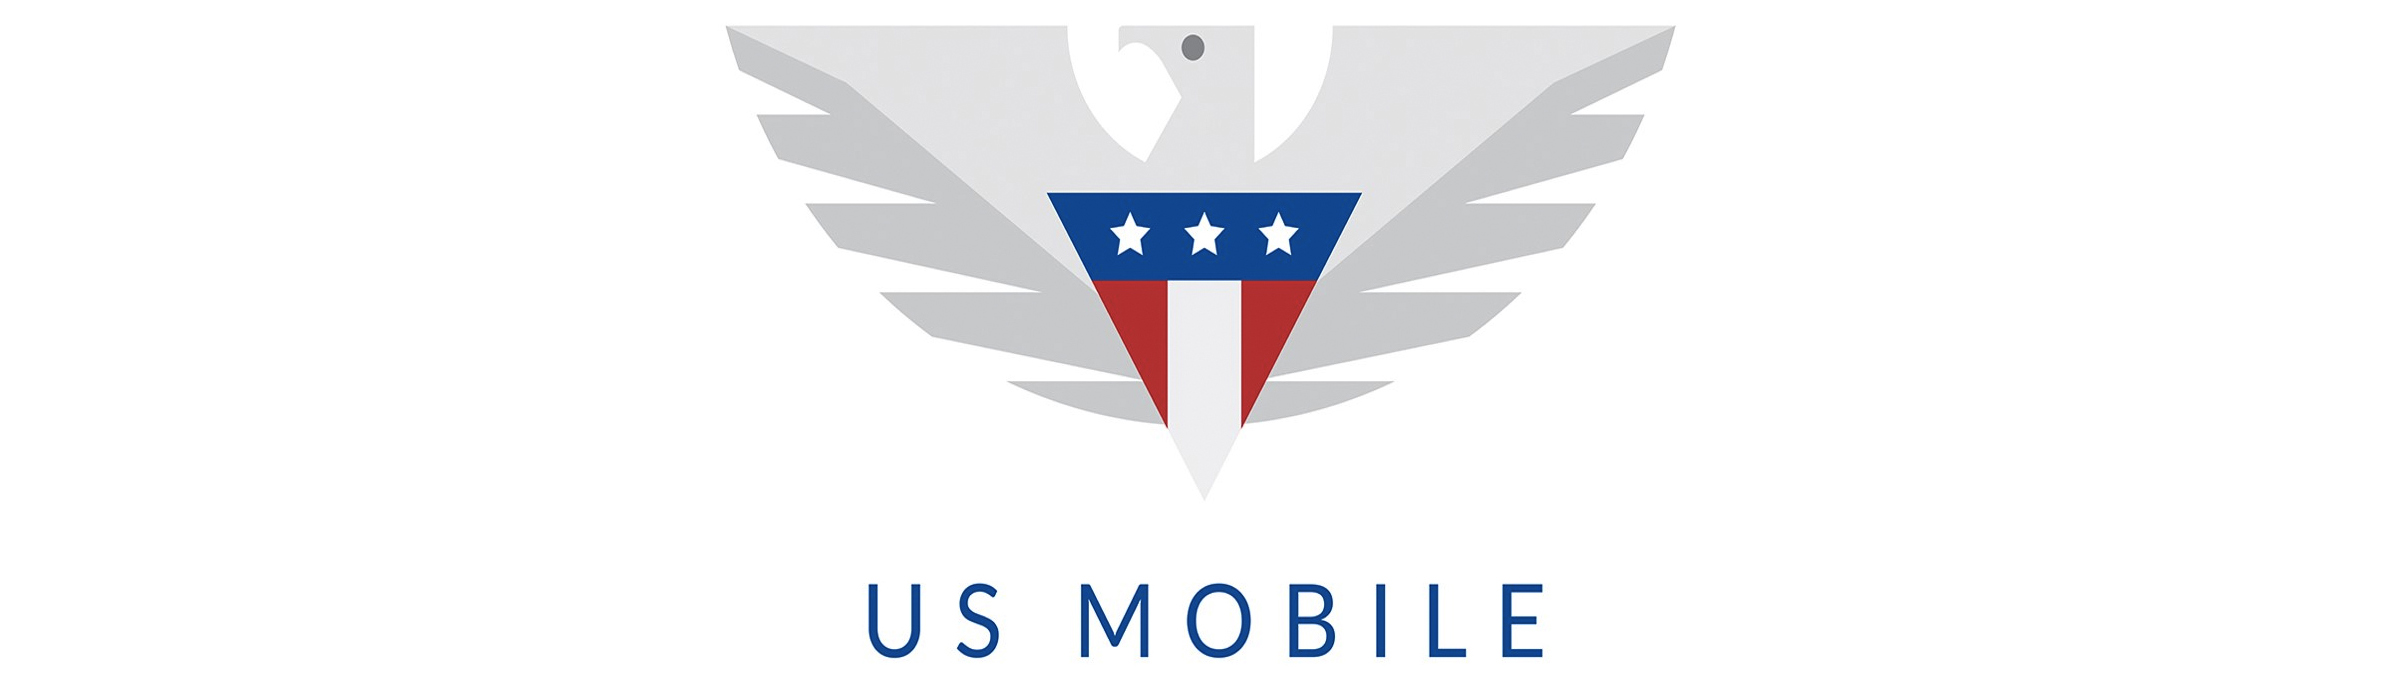 best cell phone providers: US Mobile is one of the most flexible providers